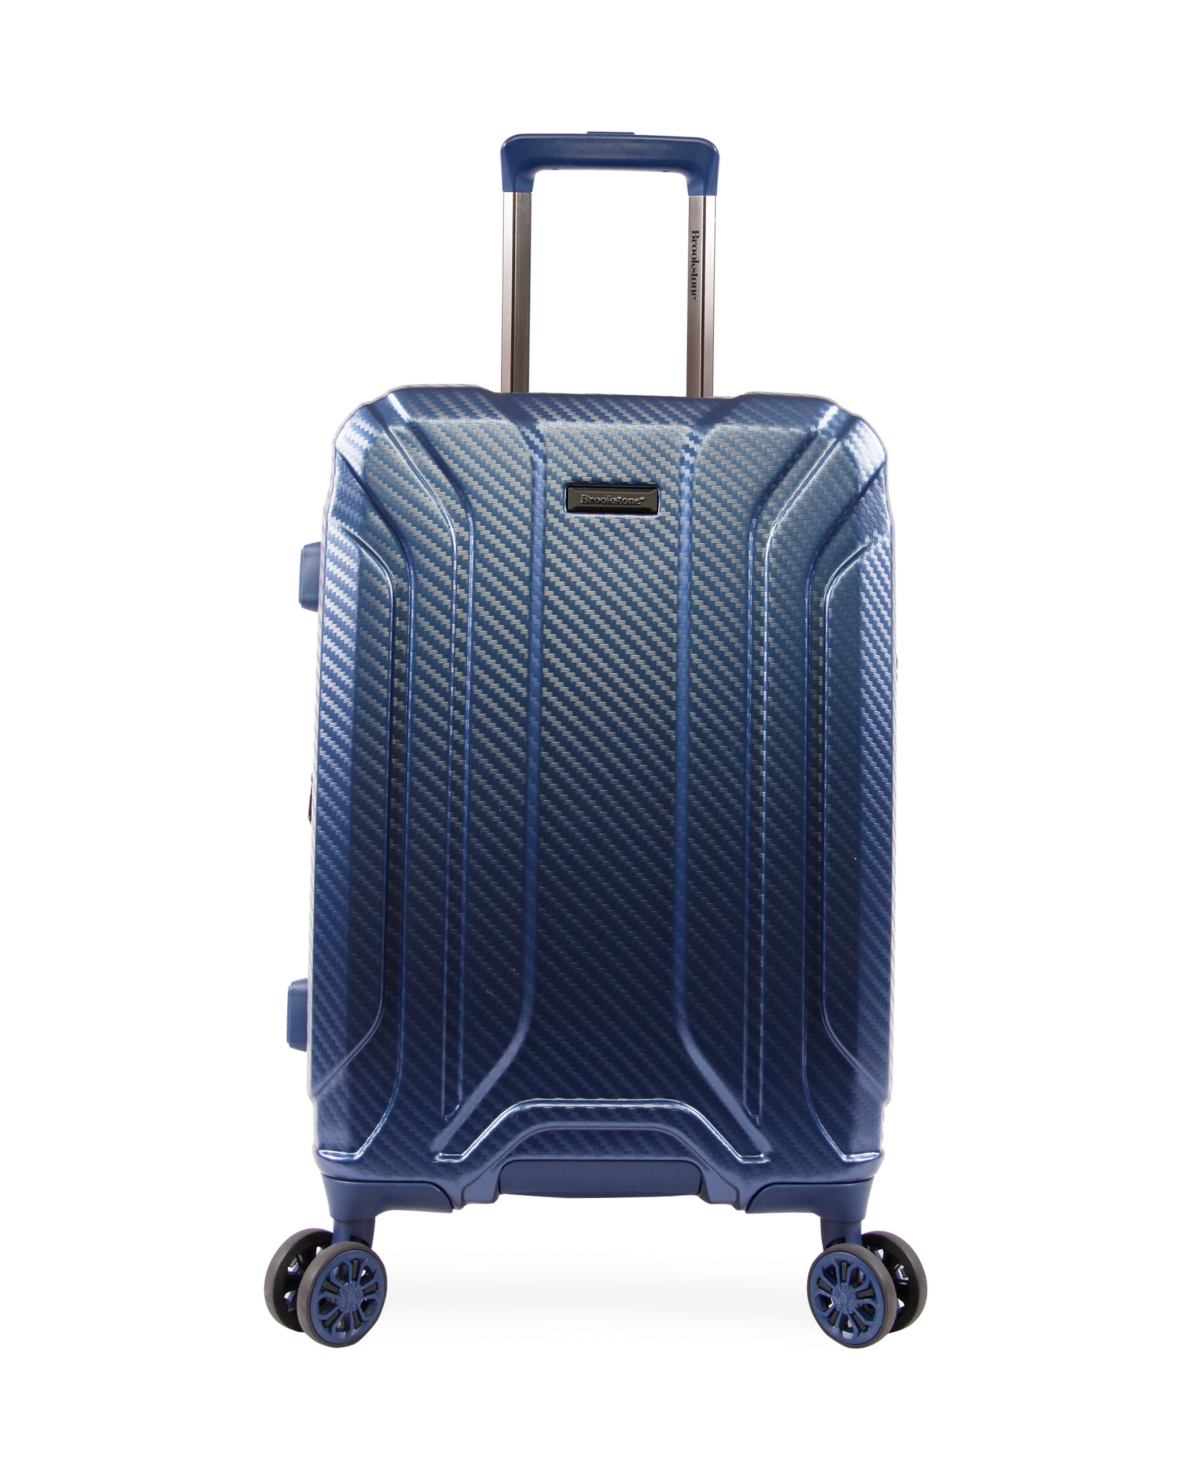 Keane 21" Hardside Carry-On Luggage with Charging Port - Charcoal